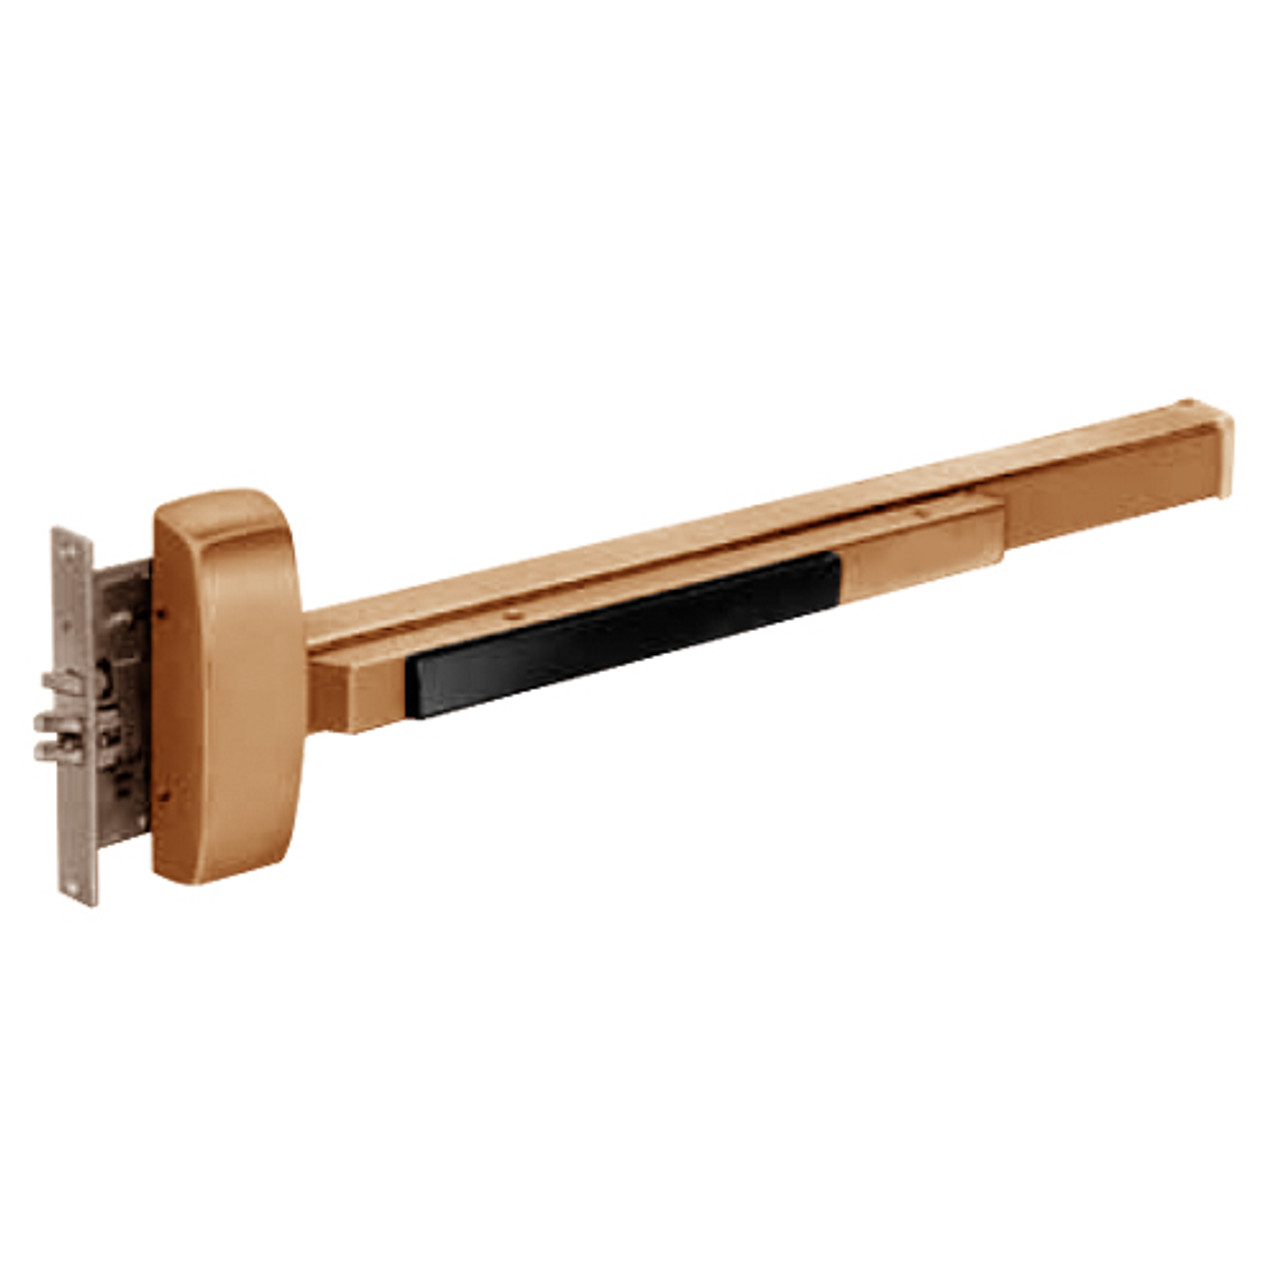 12-8910G-LHR-10 Sargent 80 Series Exit Only Fire Rated Mortise Lock Exit Device in Satin Bronze